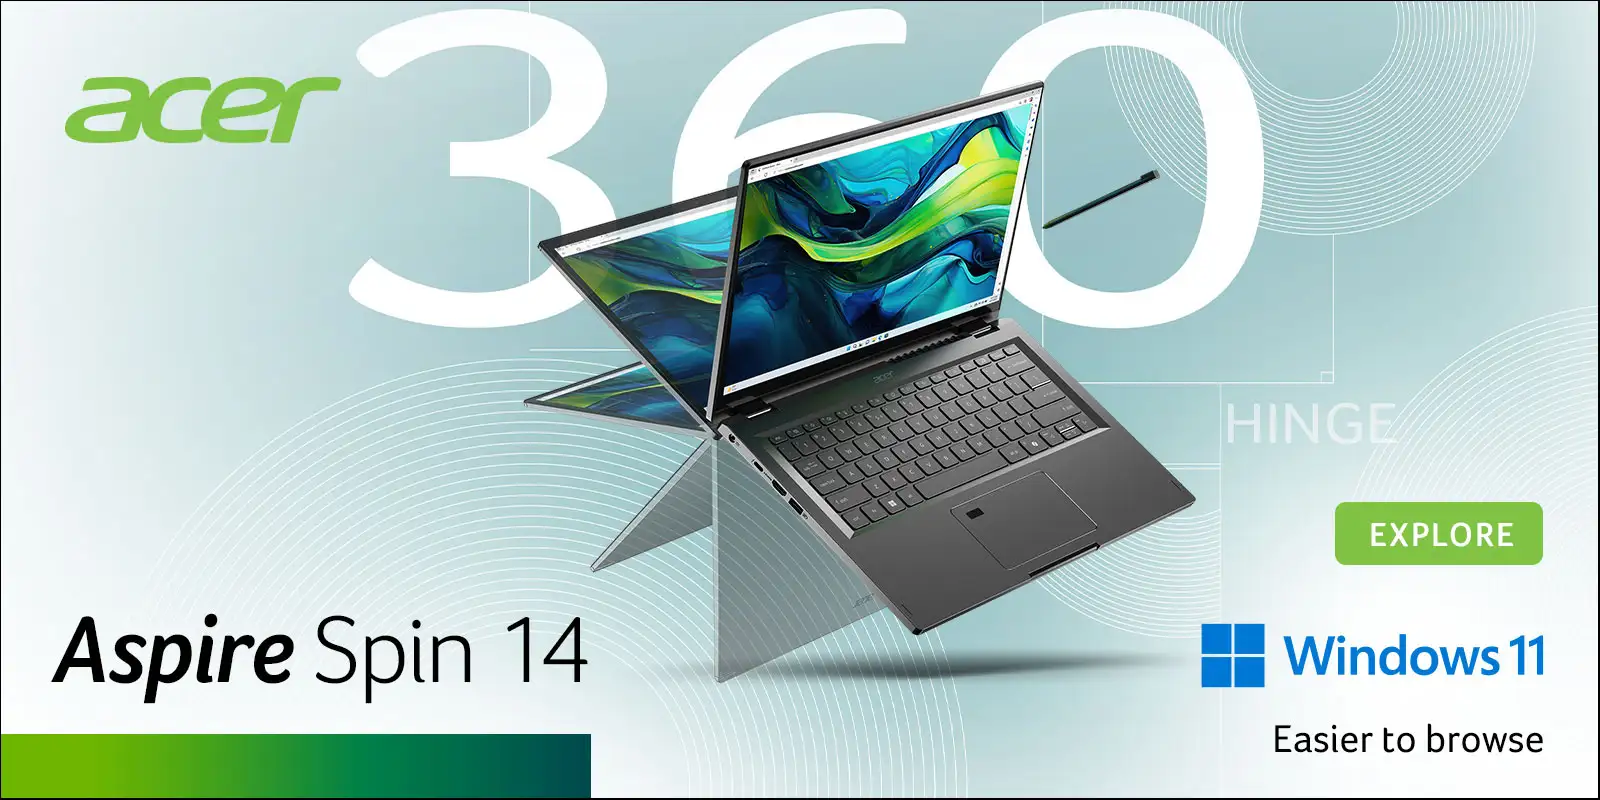 Acer Aspire Spin 14. Easier to browse. Explore